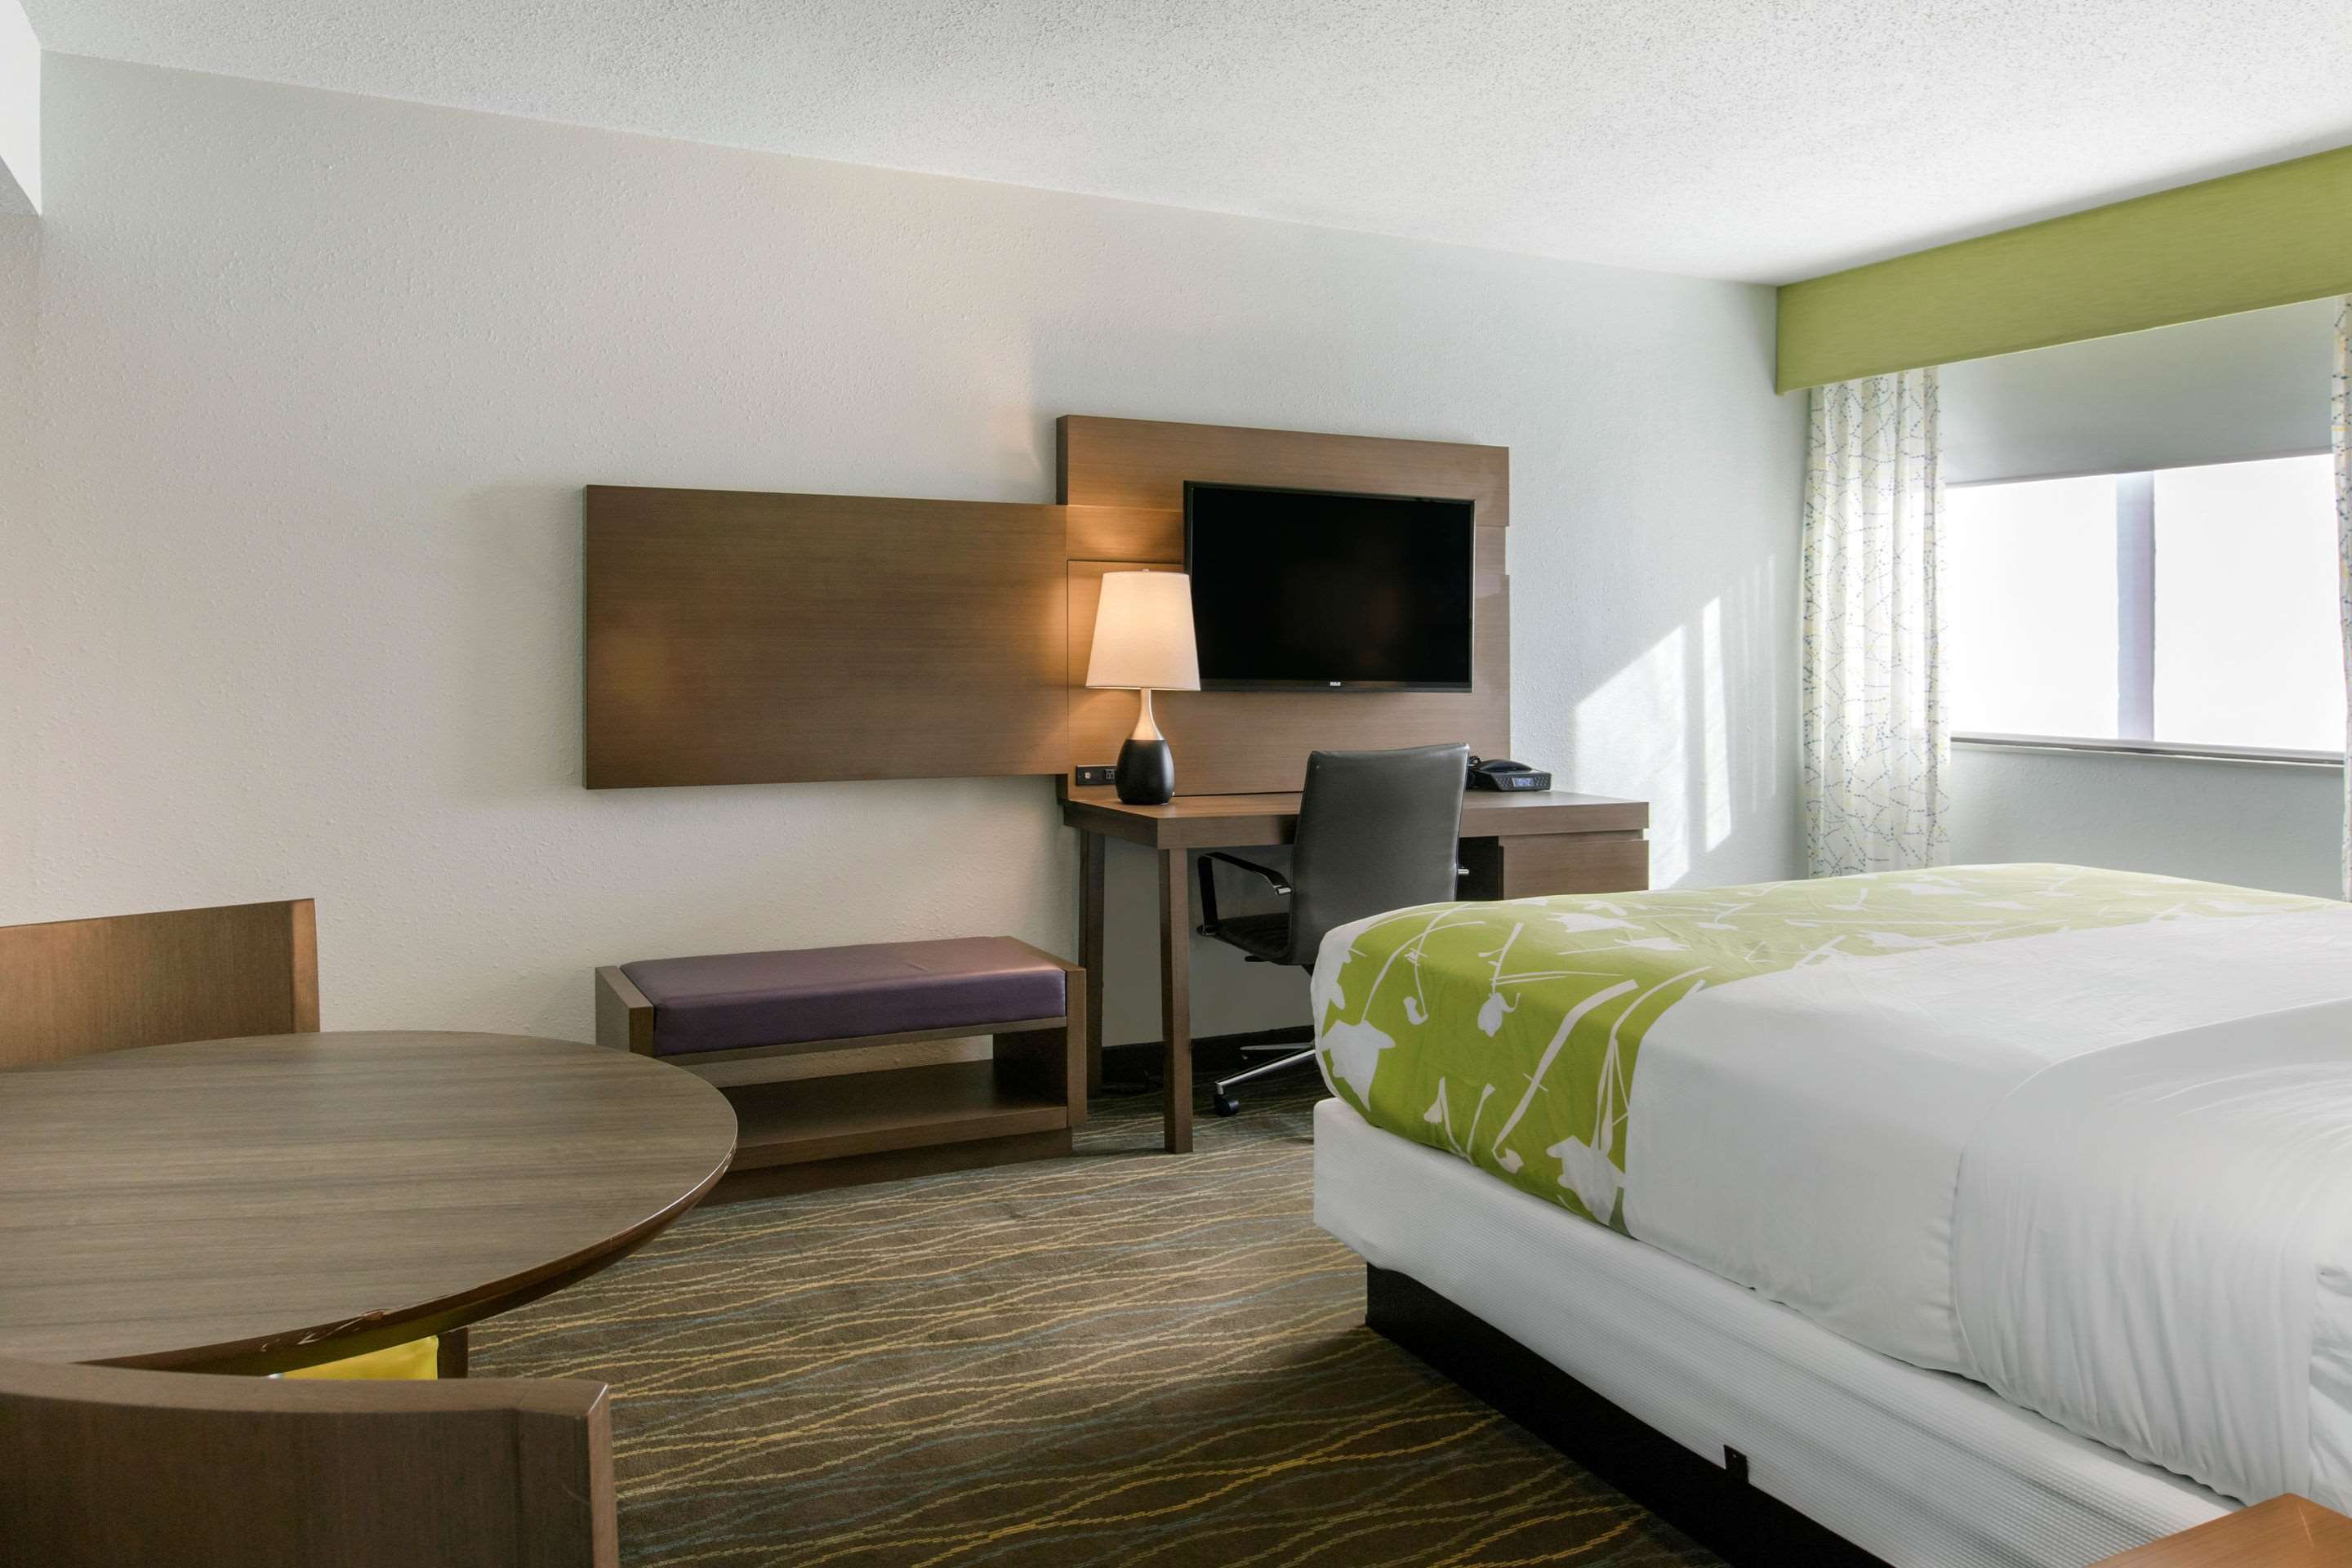 The Grand River Hotel, Ascend Hotel Collection Photo